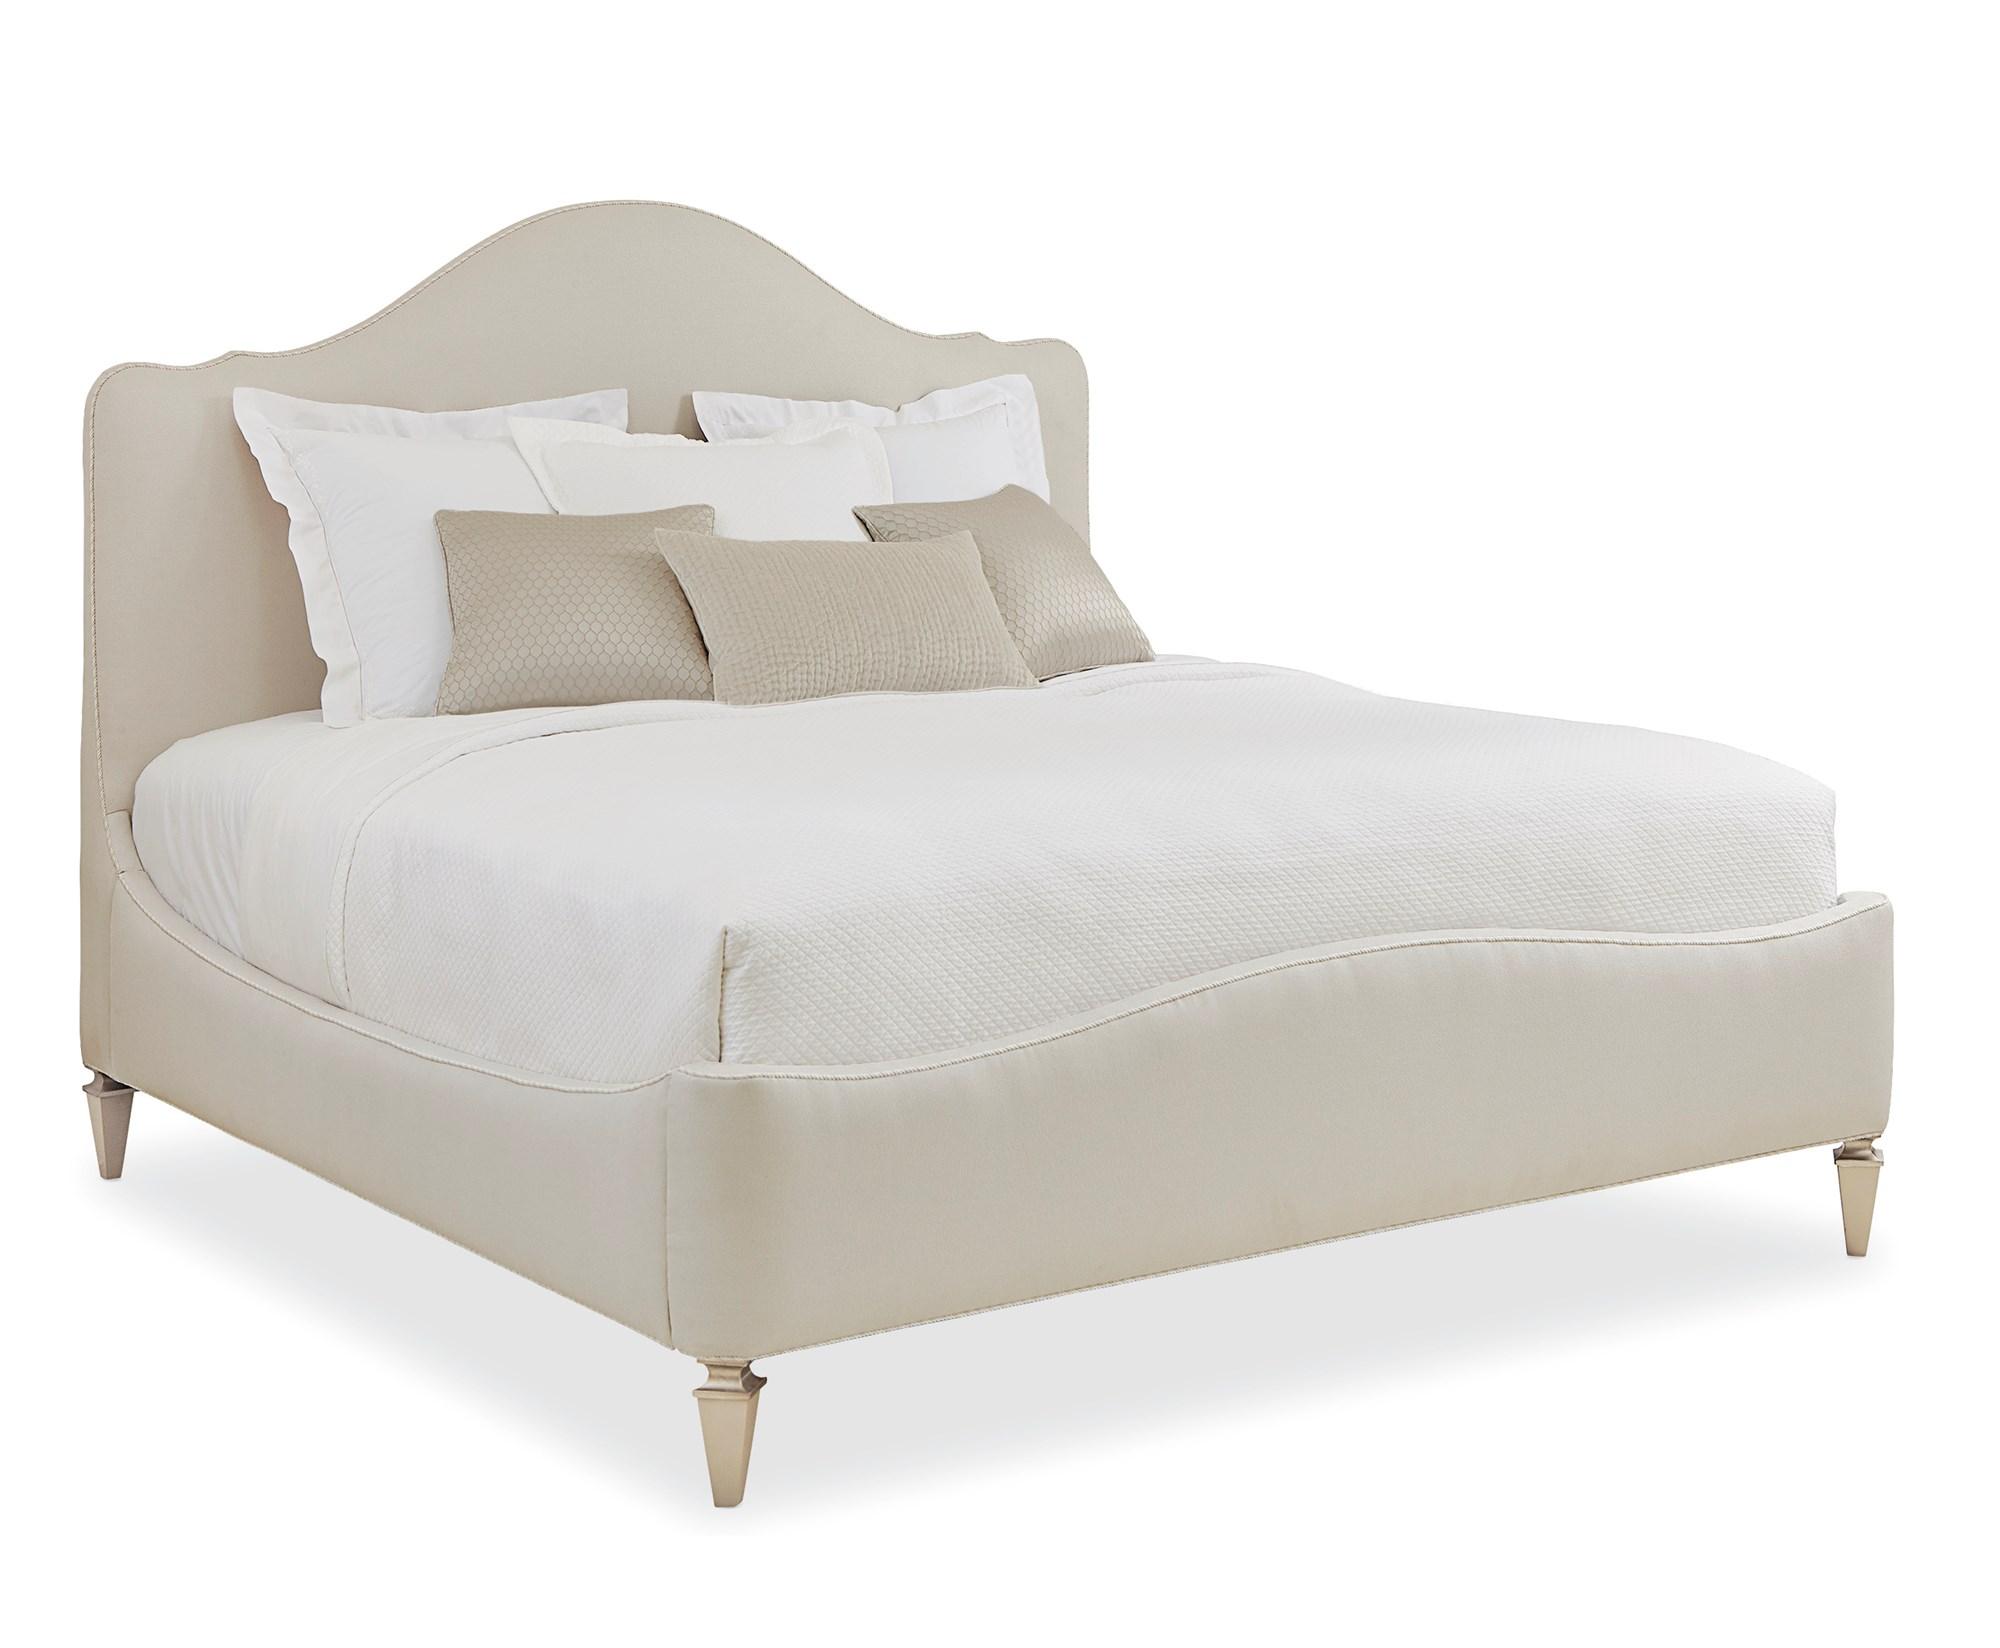 

    
Cream Finish Camel-Back Headboard Queen Bed A NIGHT IN PARIS by Caracole
